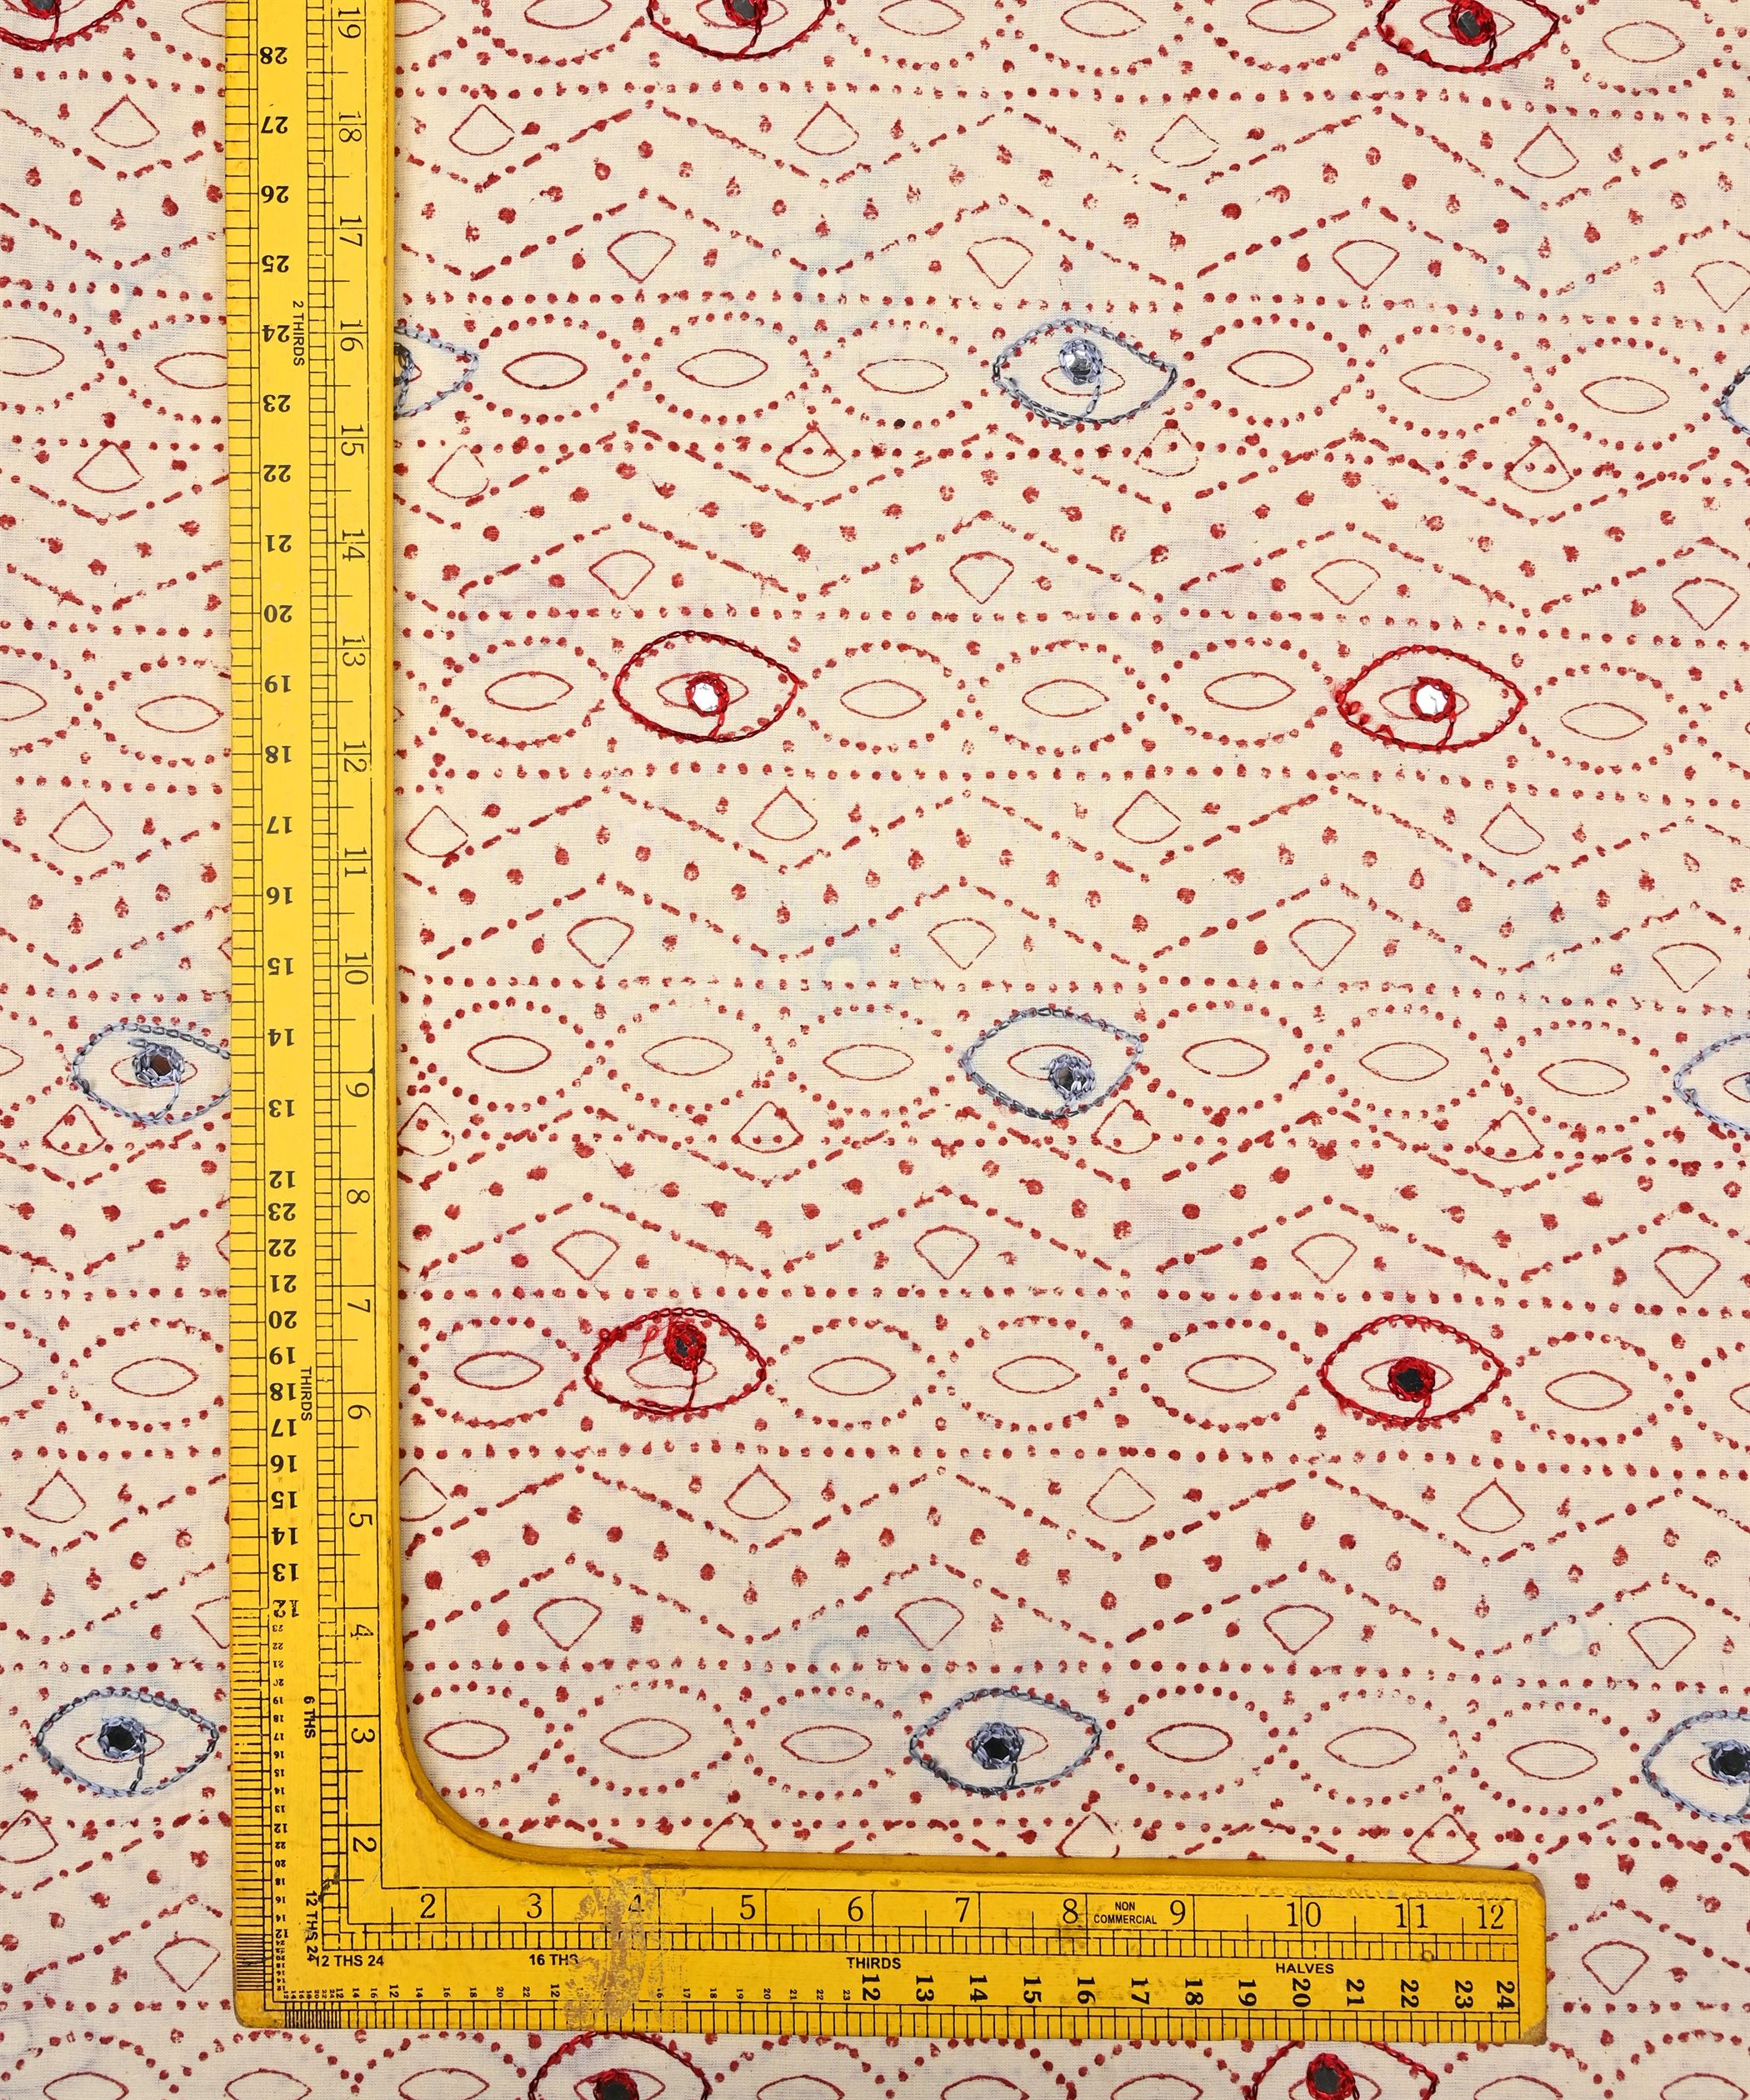 Maroon printed Mal Cotton fabric with gray eye butta embroidery and mirror work